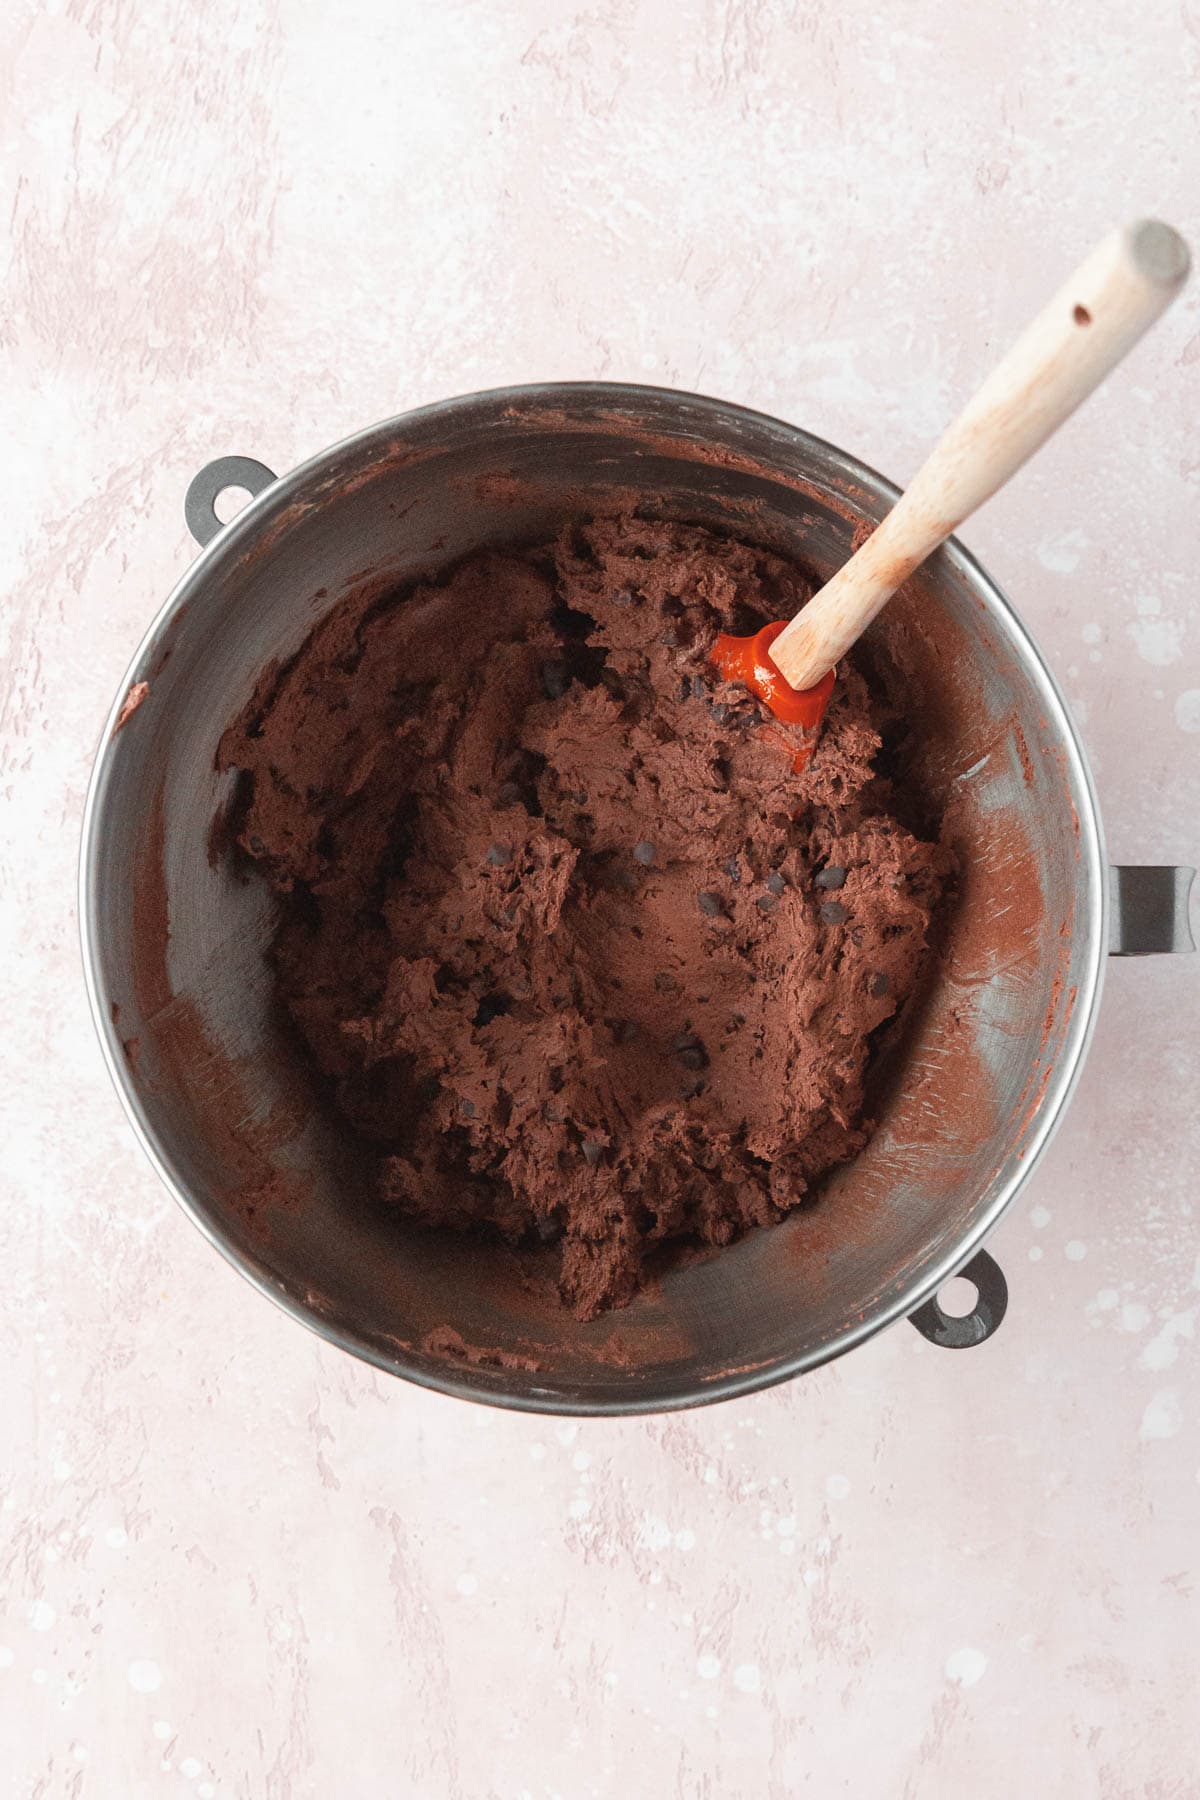 Chocolate chips mixed into the chocolate cookie dough with a spatula.